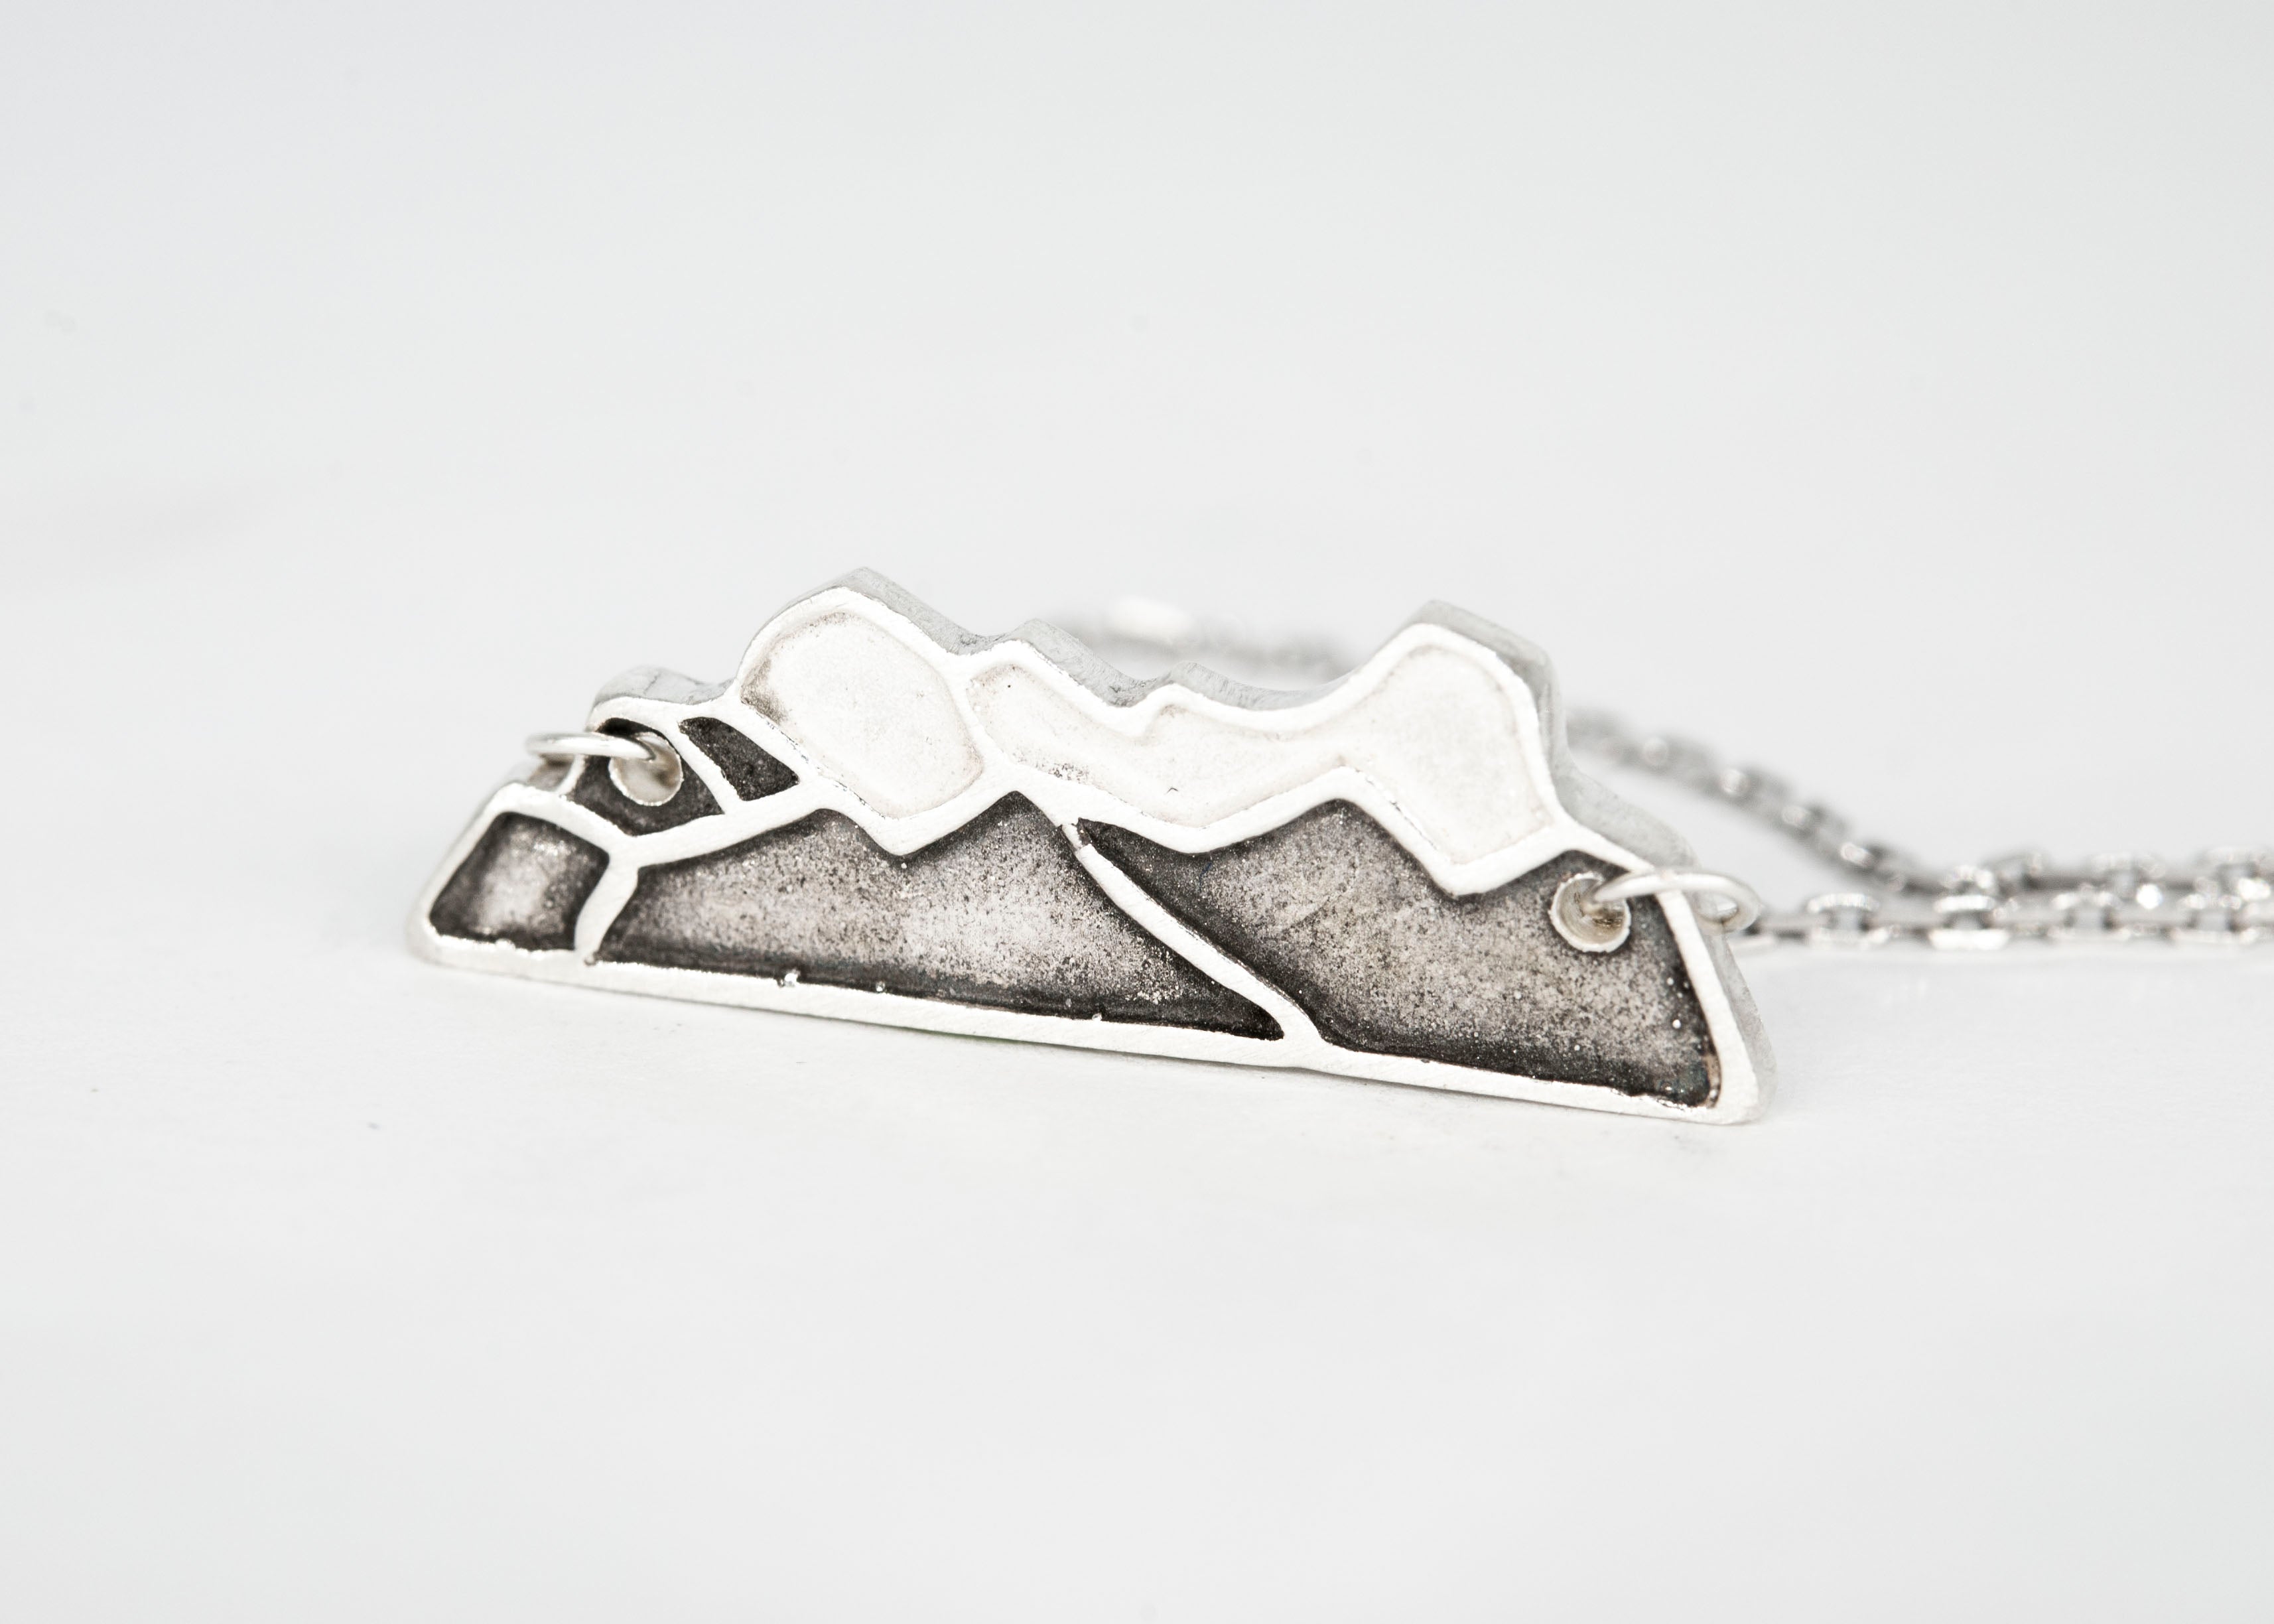 Mount Lawrence Grassi Necklace